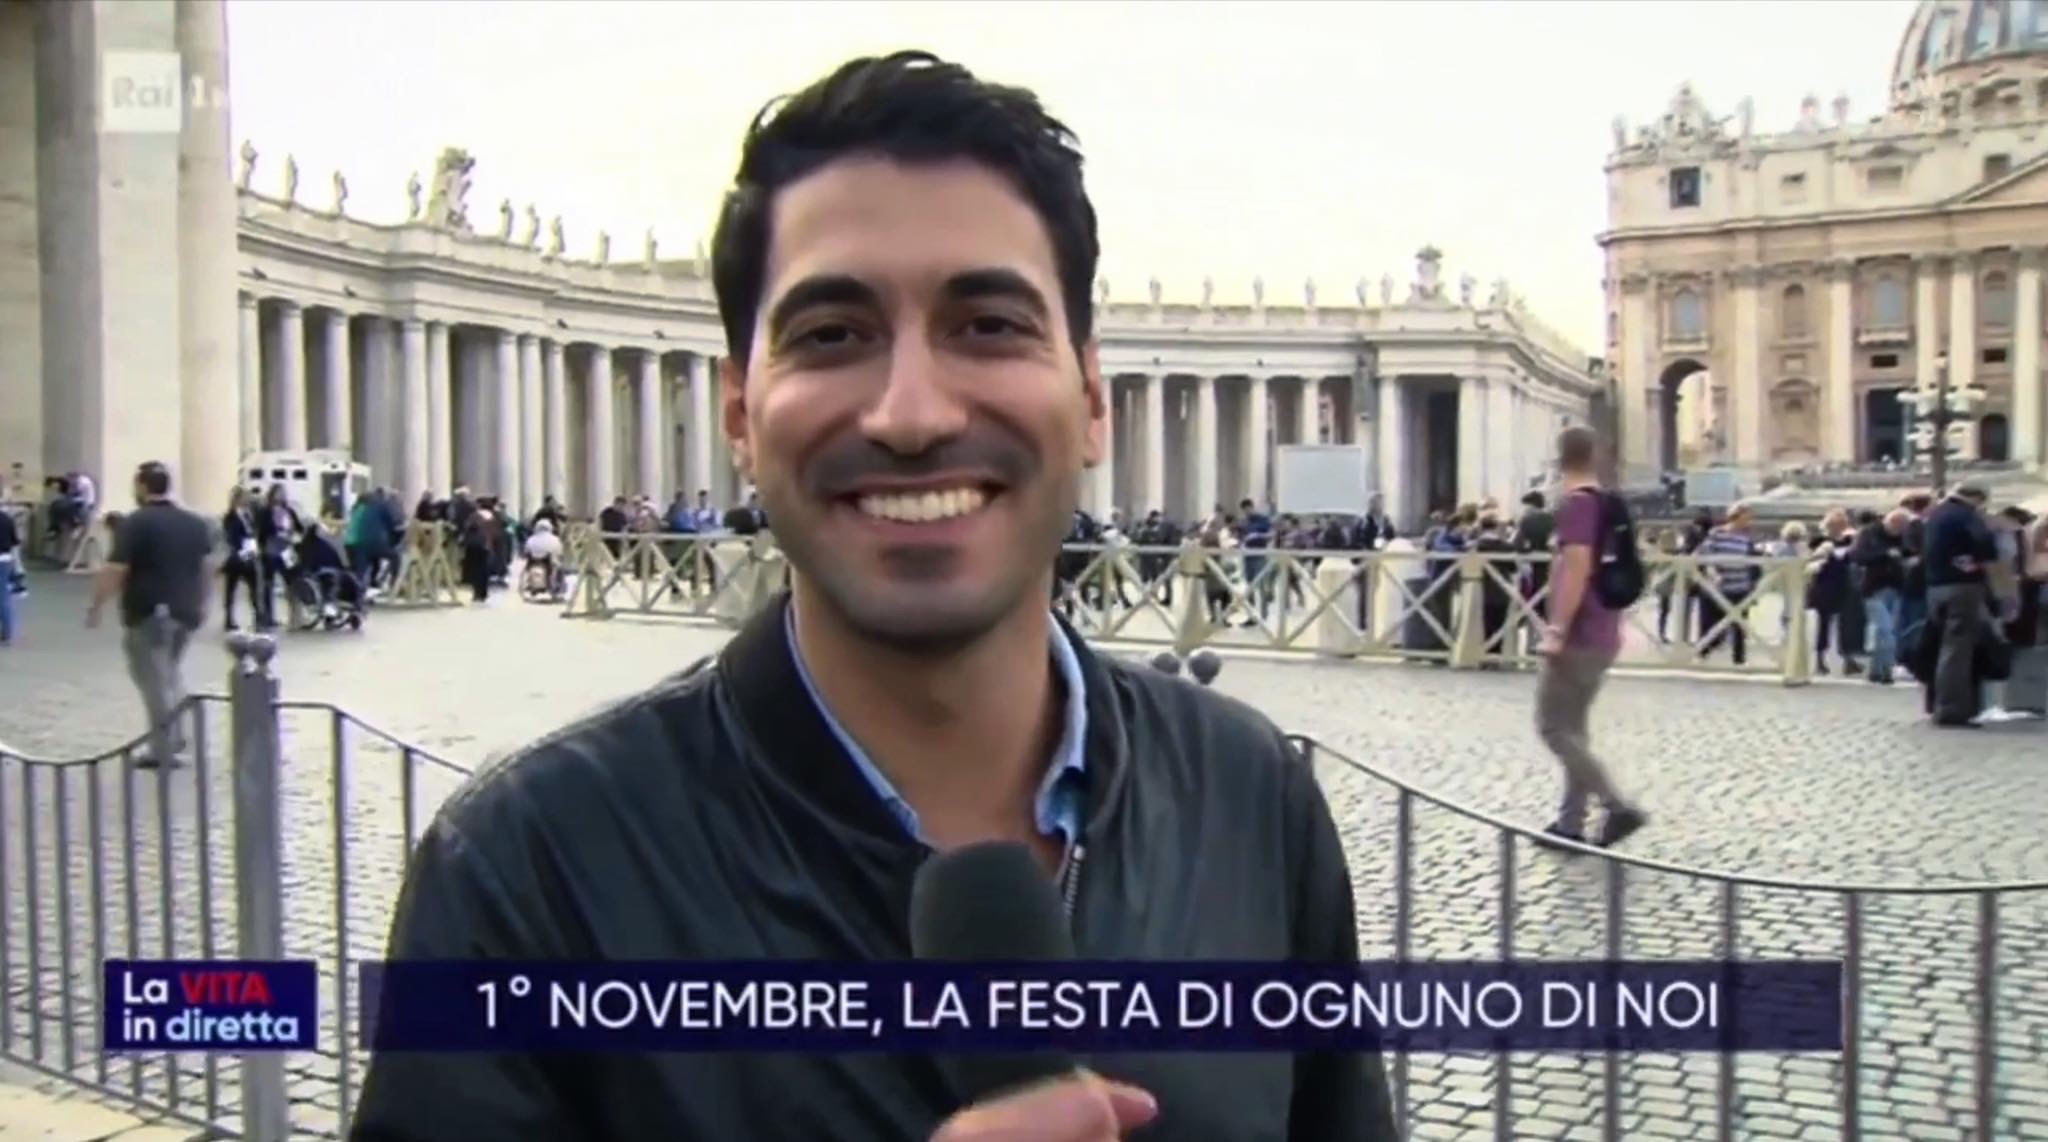 Luca Forlani, engaged as a journalist and correspondent of "La vita in ricerca"